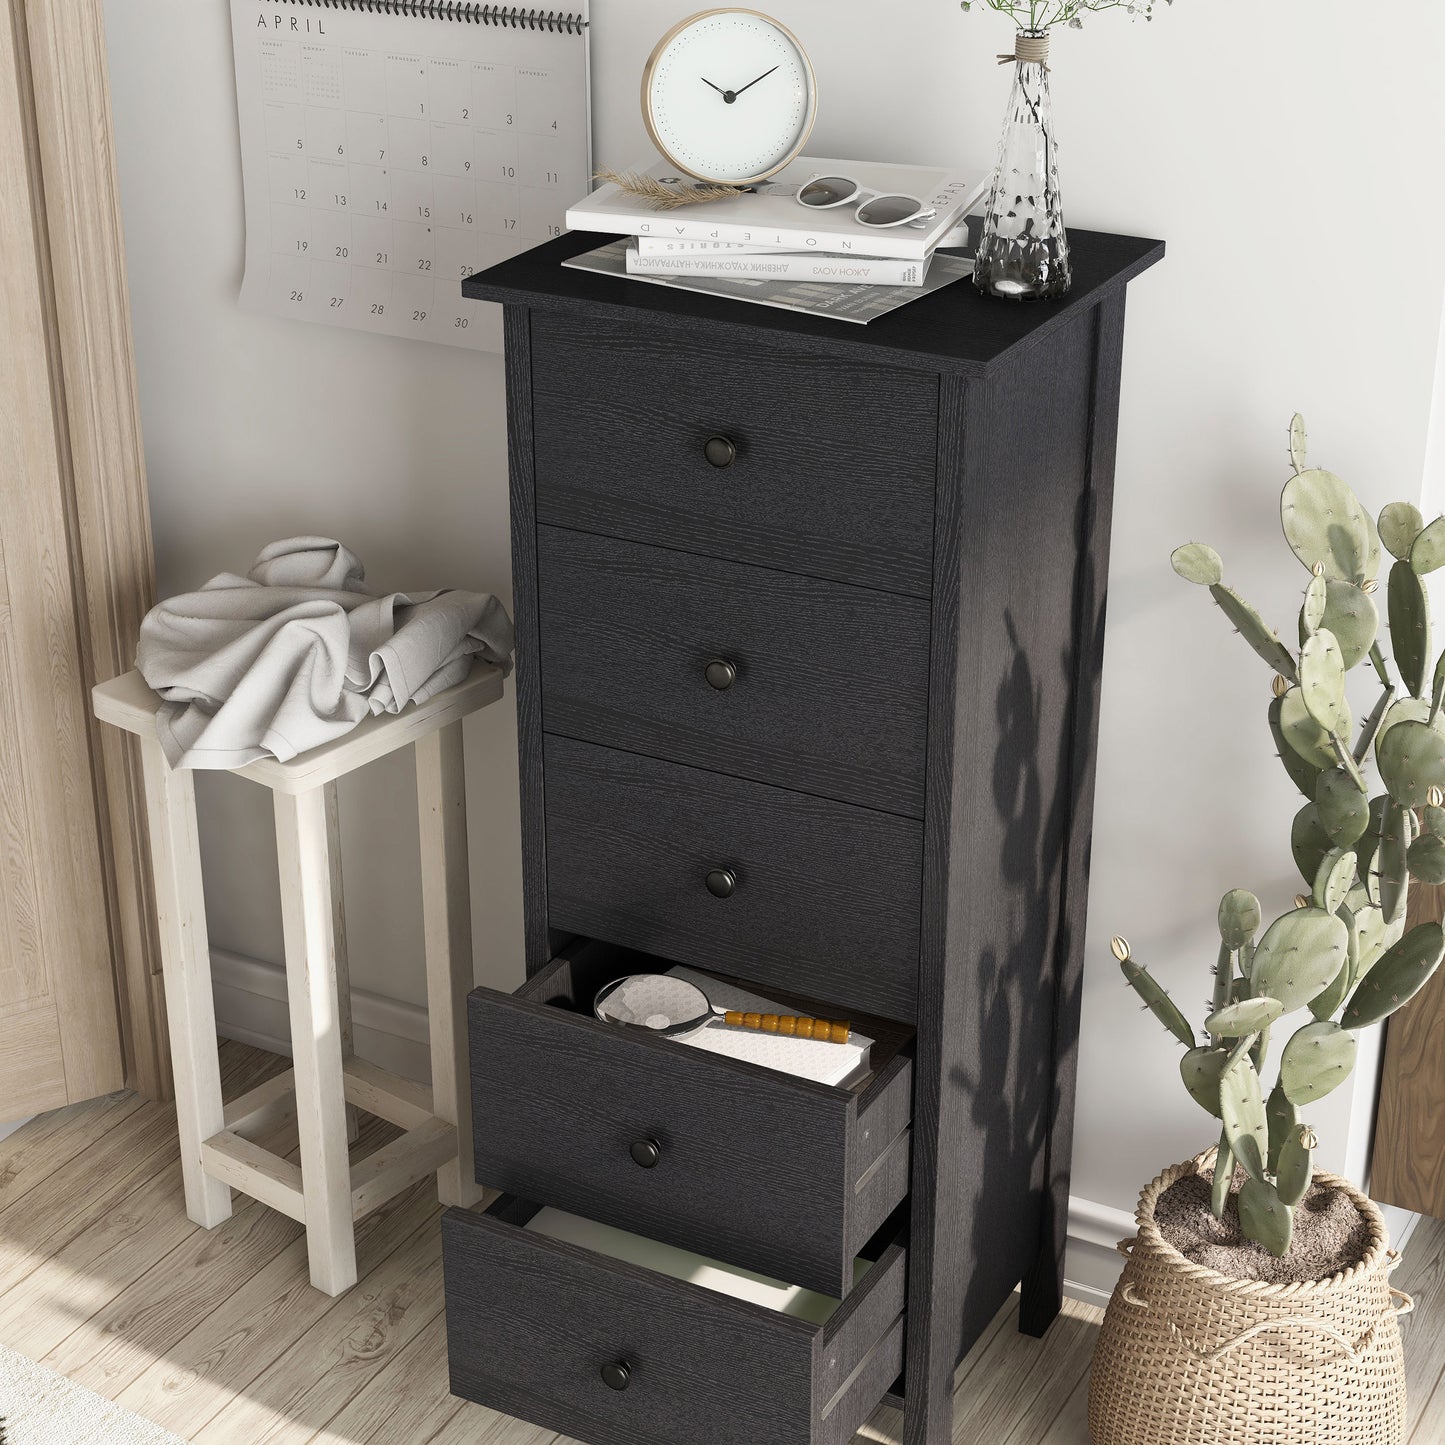 Left angled transitional black slim five-drawer chest with two drawers open in a living area with accessories